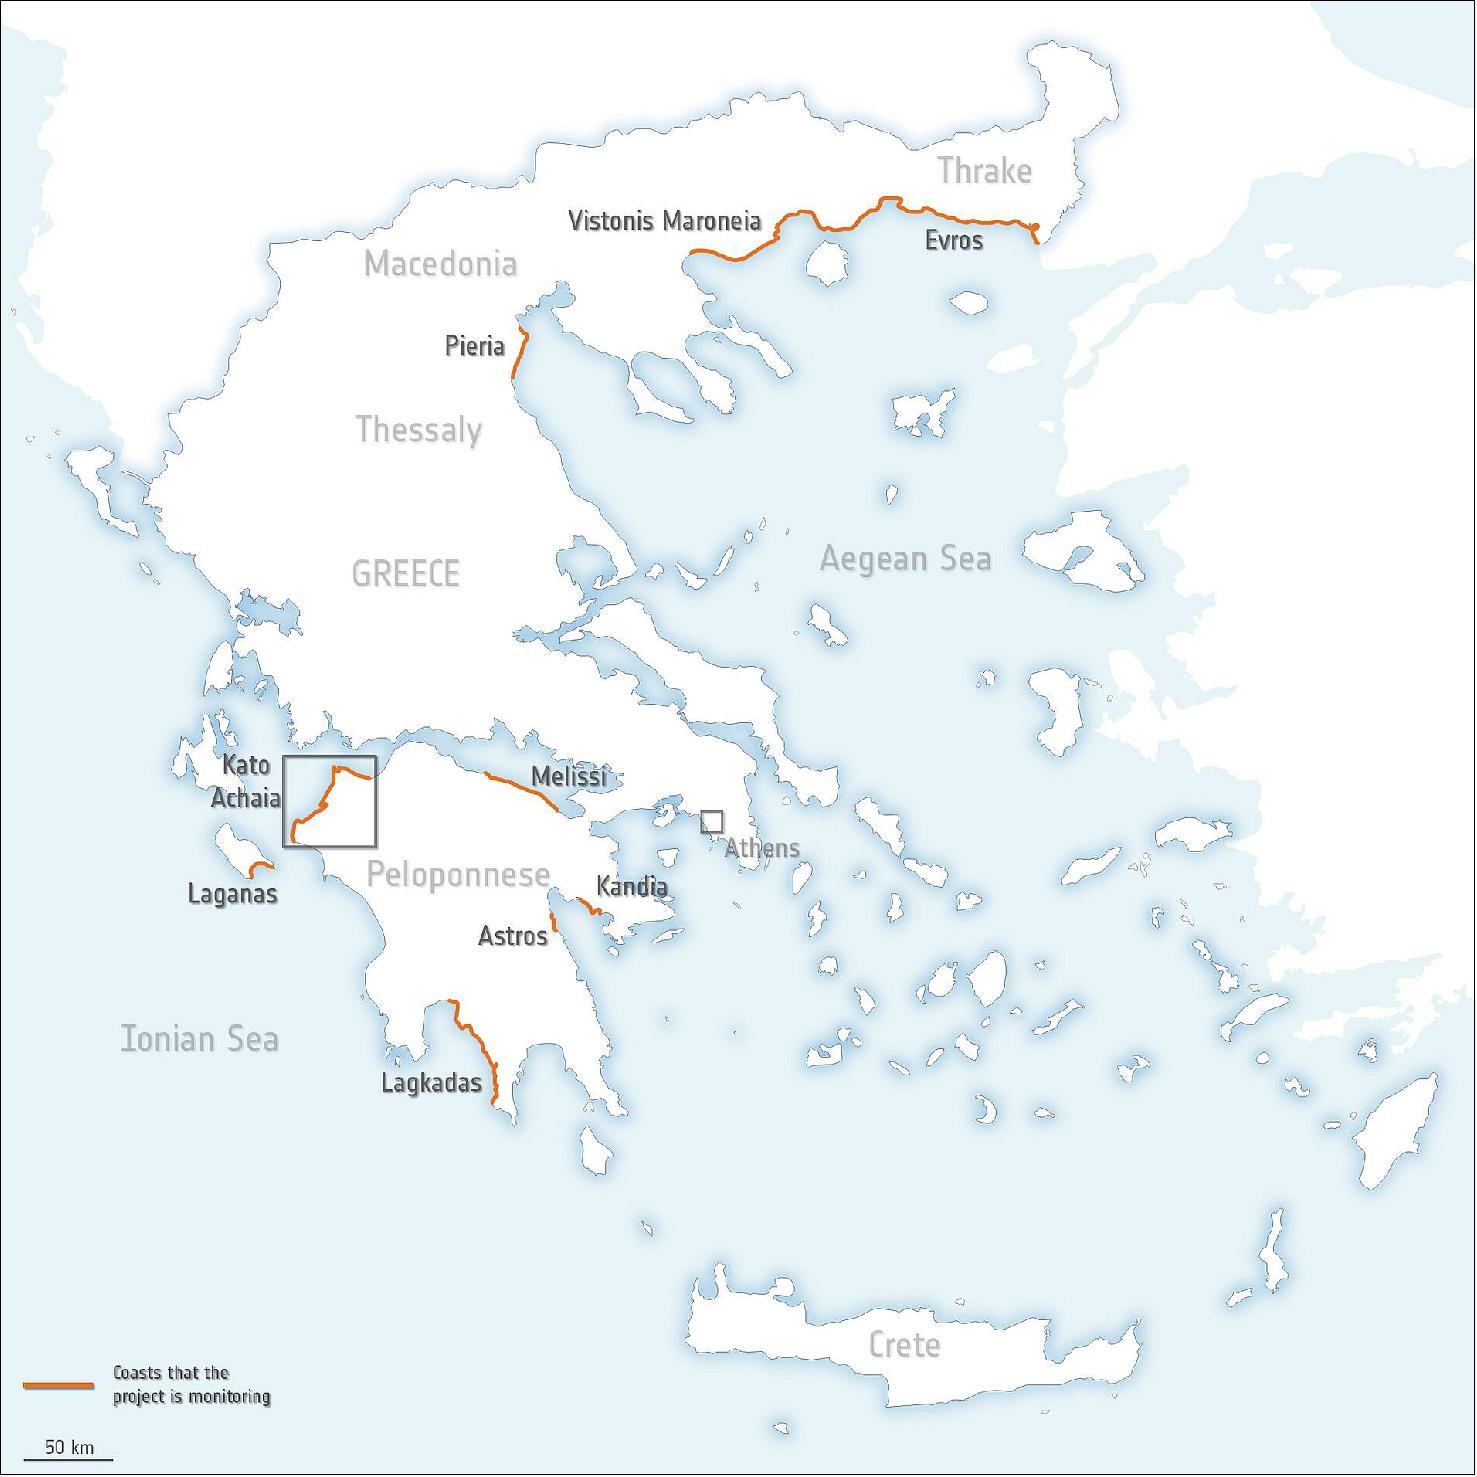 Figure 45: Coastlines in Greece mapped by Space for Shore. This map shows the coastlines in the Peloponnese, Eastern Macedonia and Thrace regions in Greece mapped by the Space for Shore project, funded by ESA (image credit: ESA)